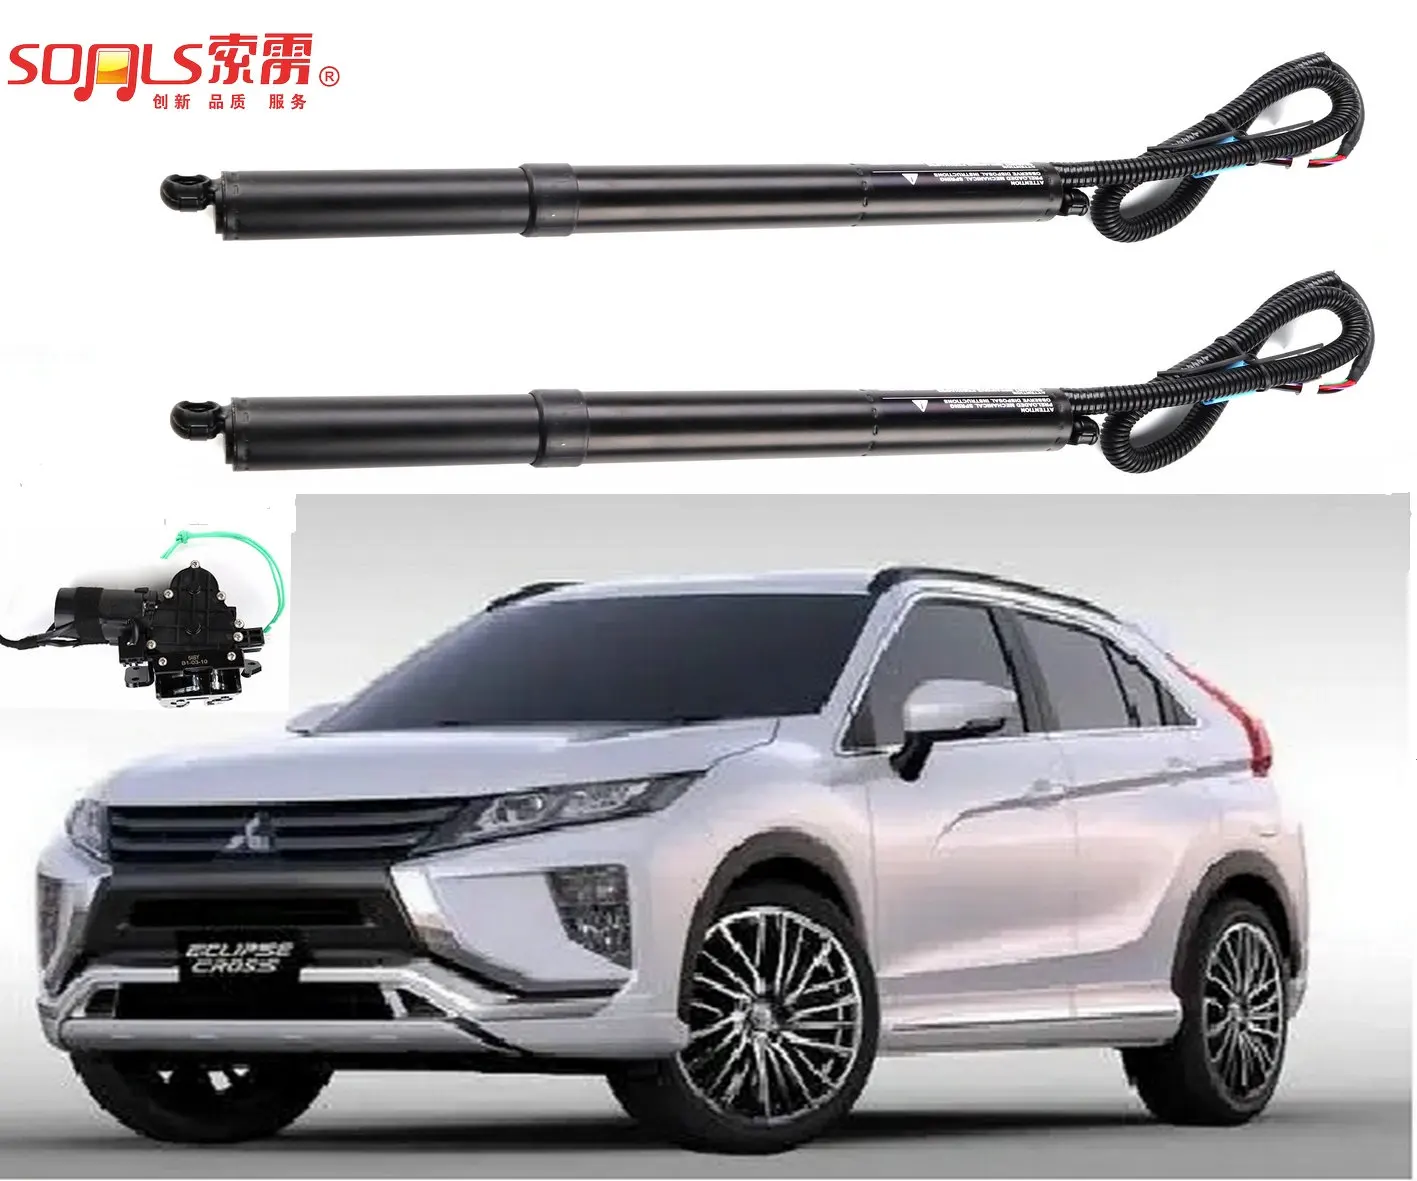 

For Mitsubishi ECLIPES CROSS Clipse Lancere-er Car Intelligent Electric Tailgate Rear Trunk Support Rod Tail Door Switch DS-214